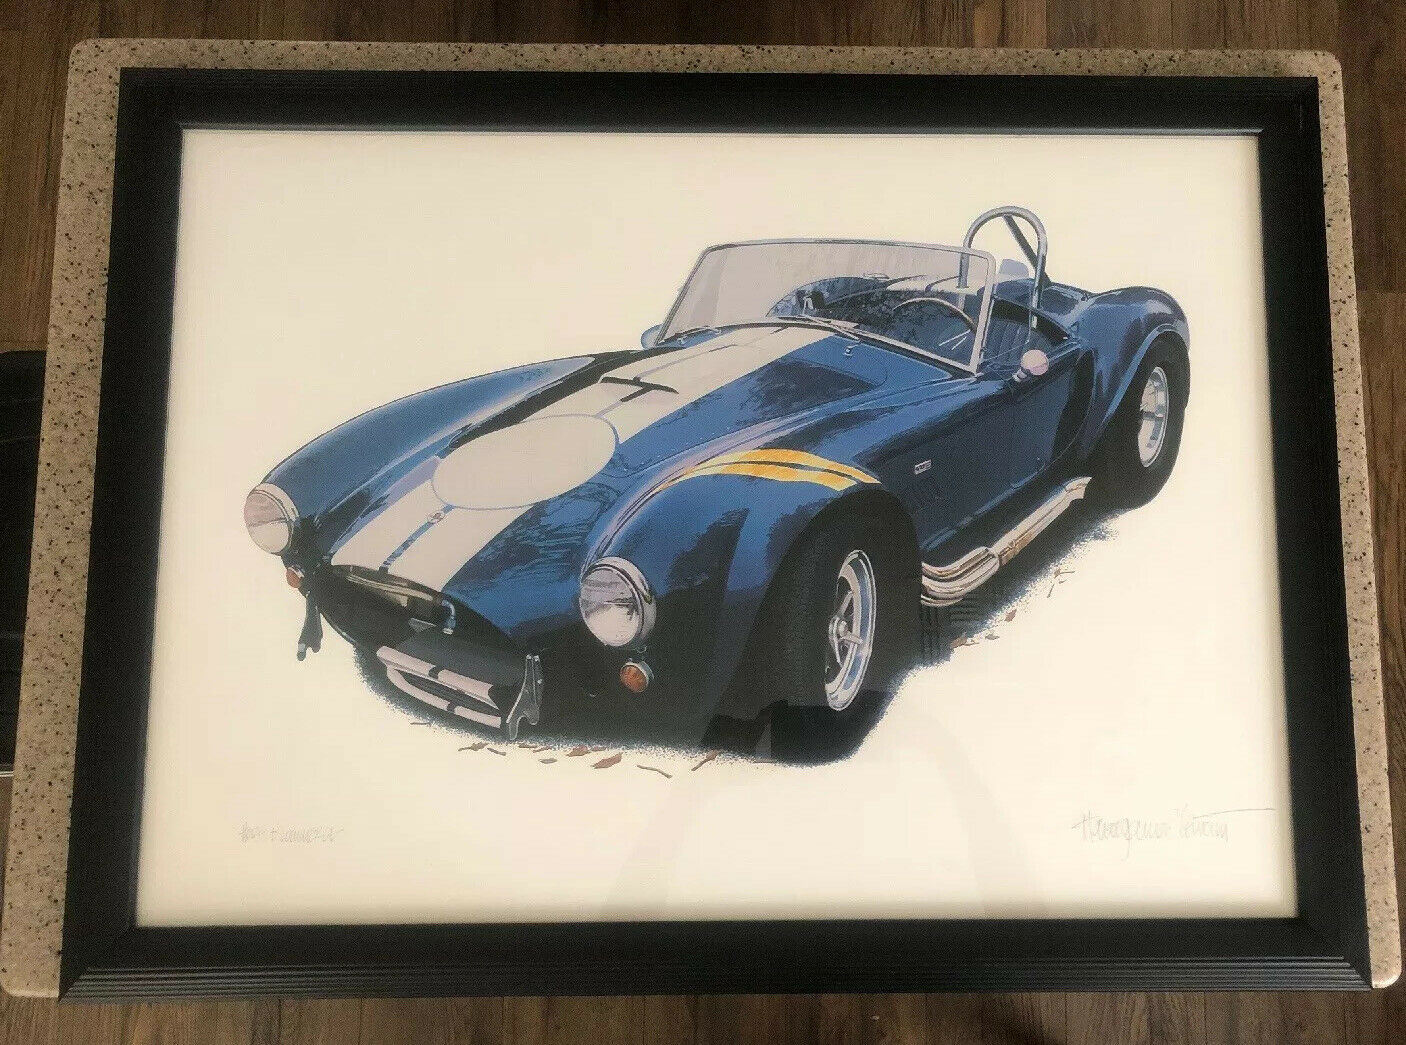 RARE!  427 Cobra Harold James Cleworth Signed Lithograph “Hors D’ Commerce”